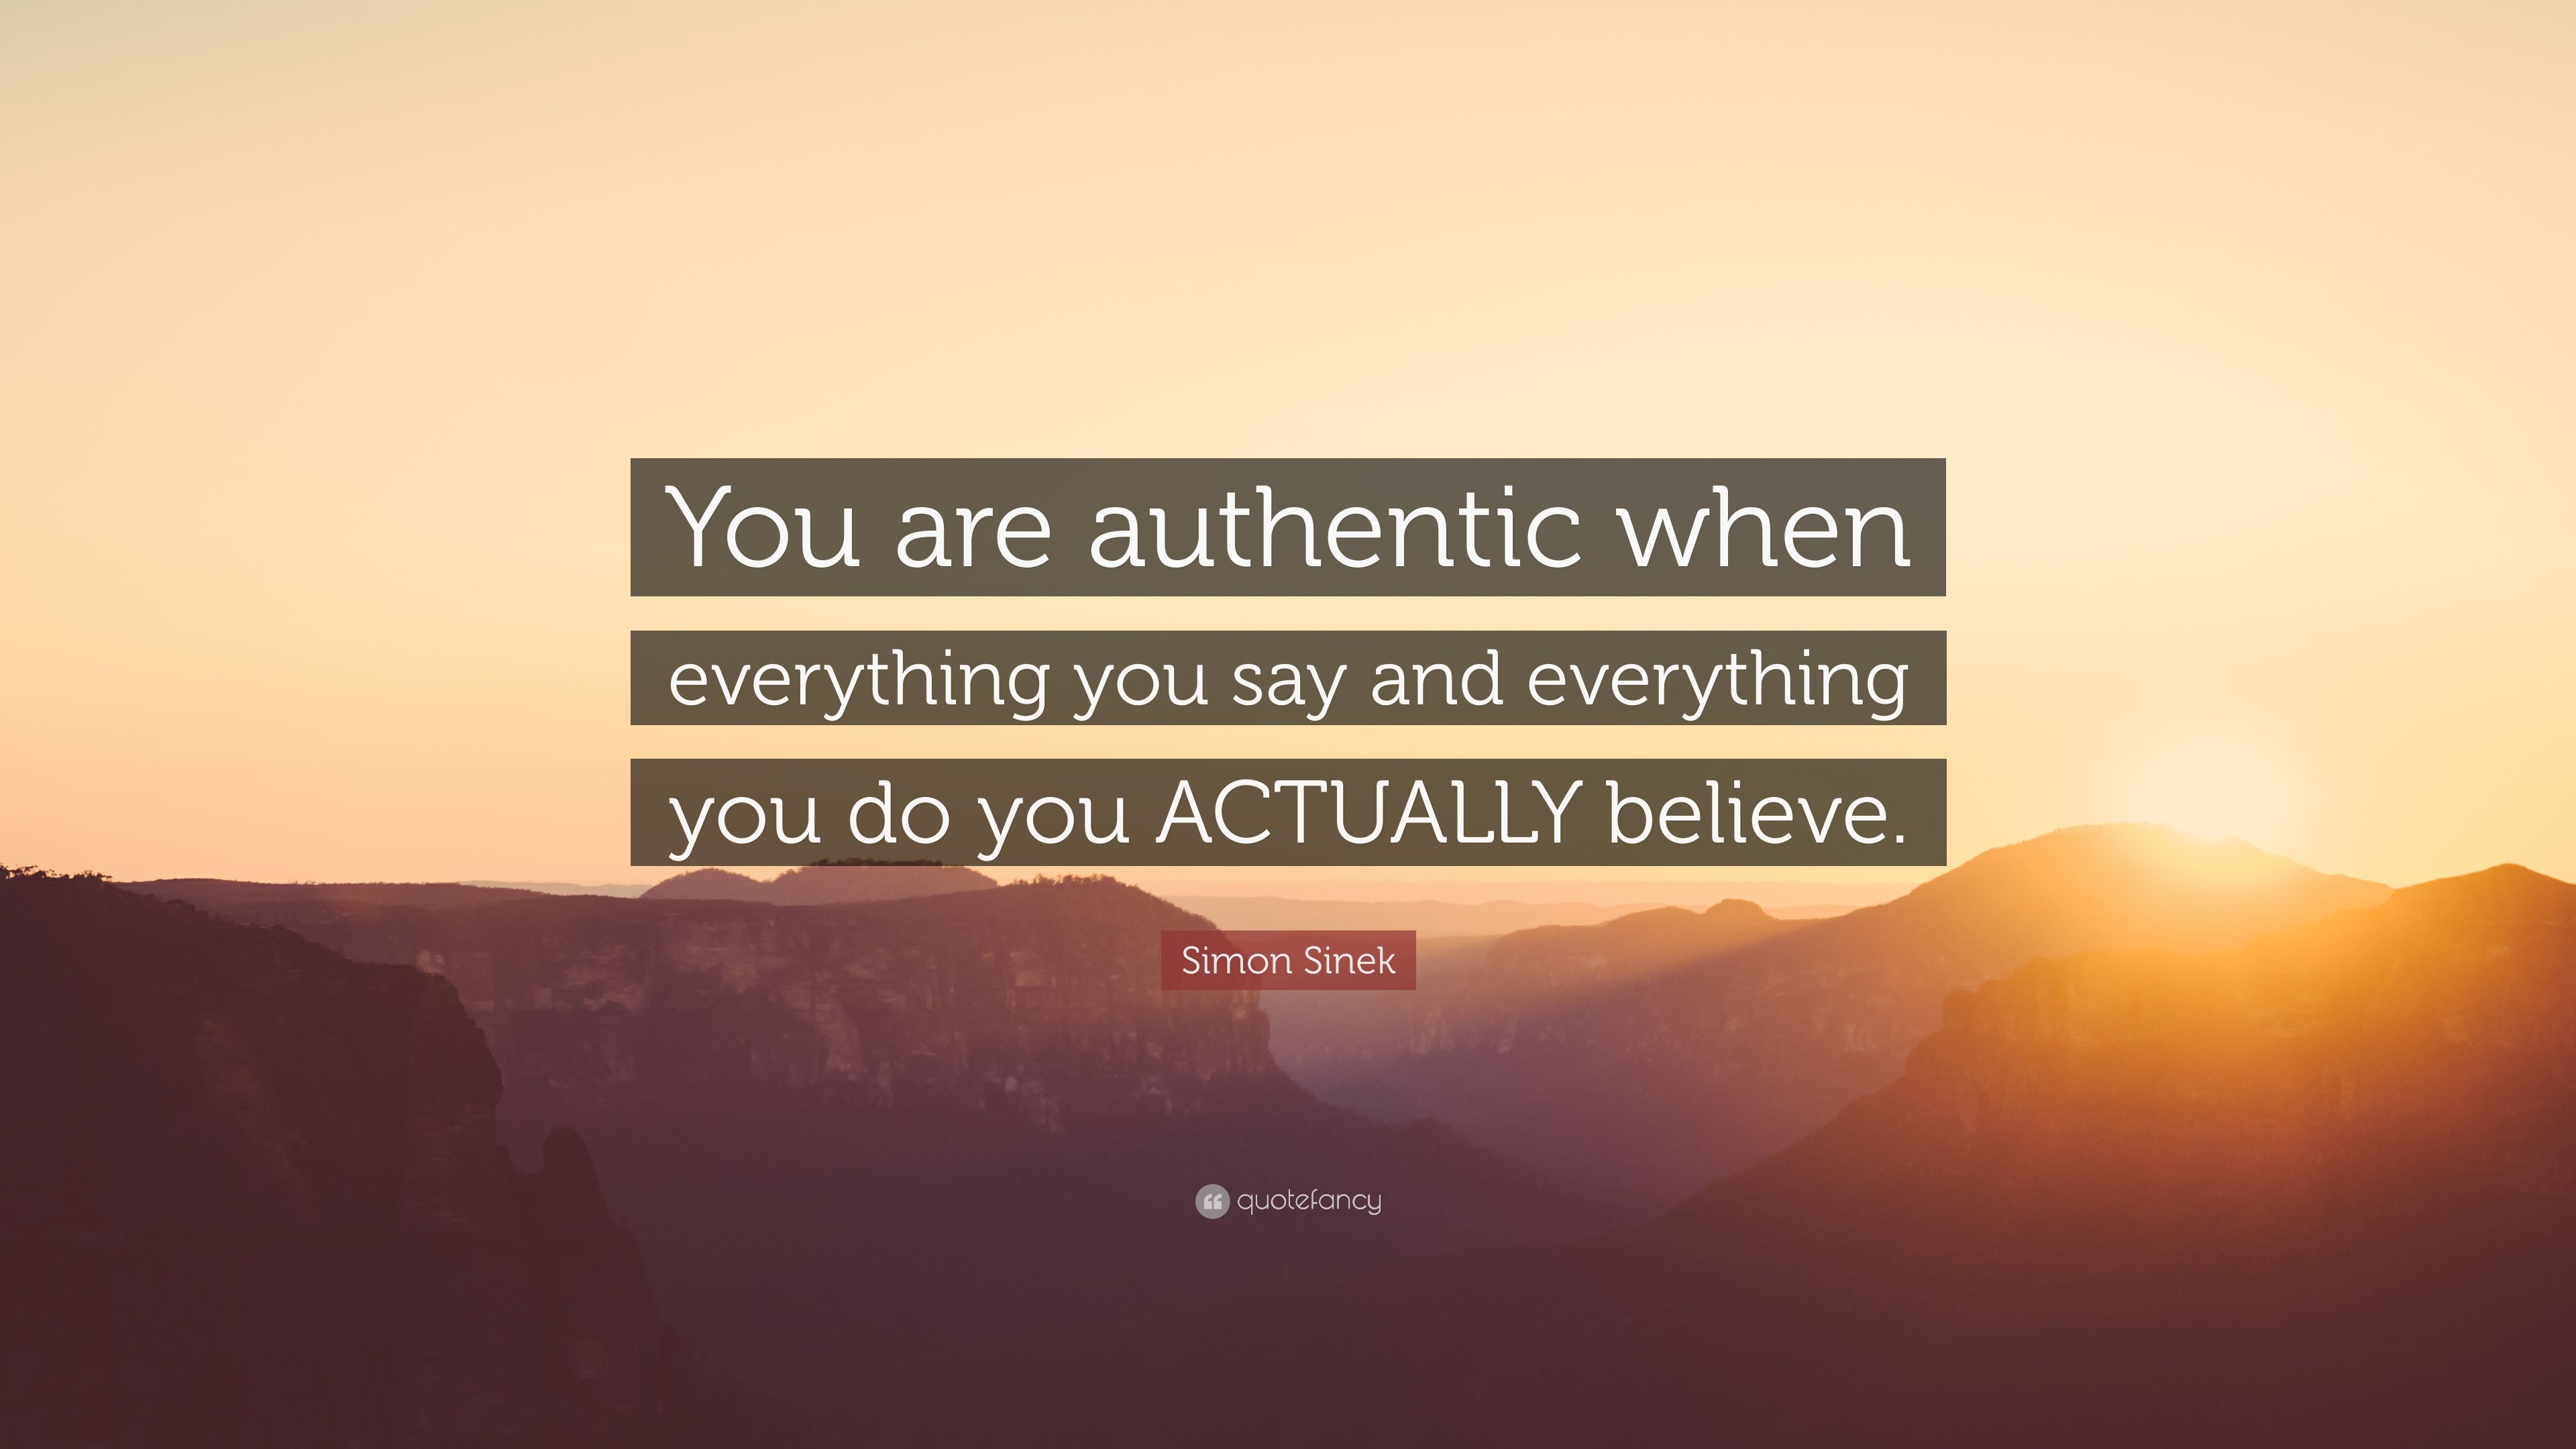 Simon Sinek Quote: “You are authentic when everything you say